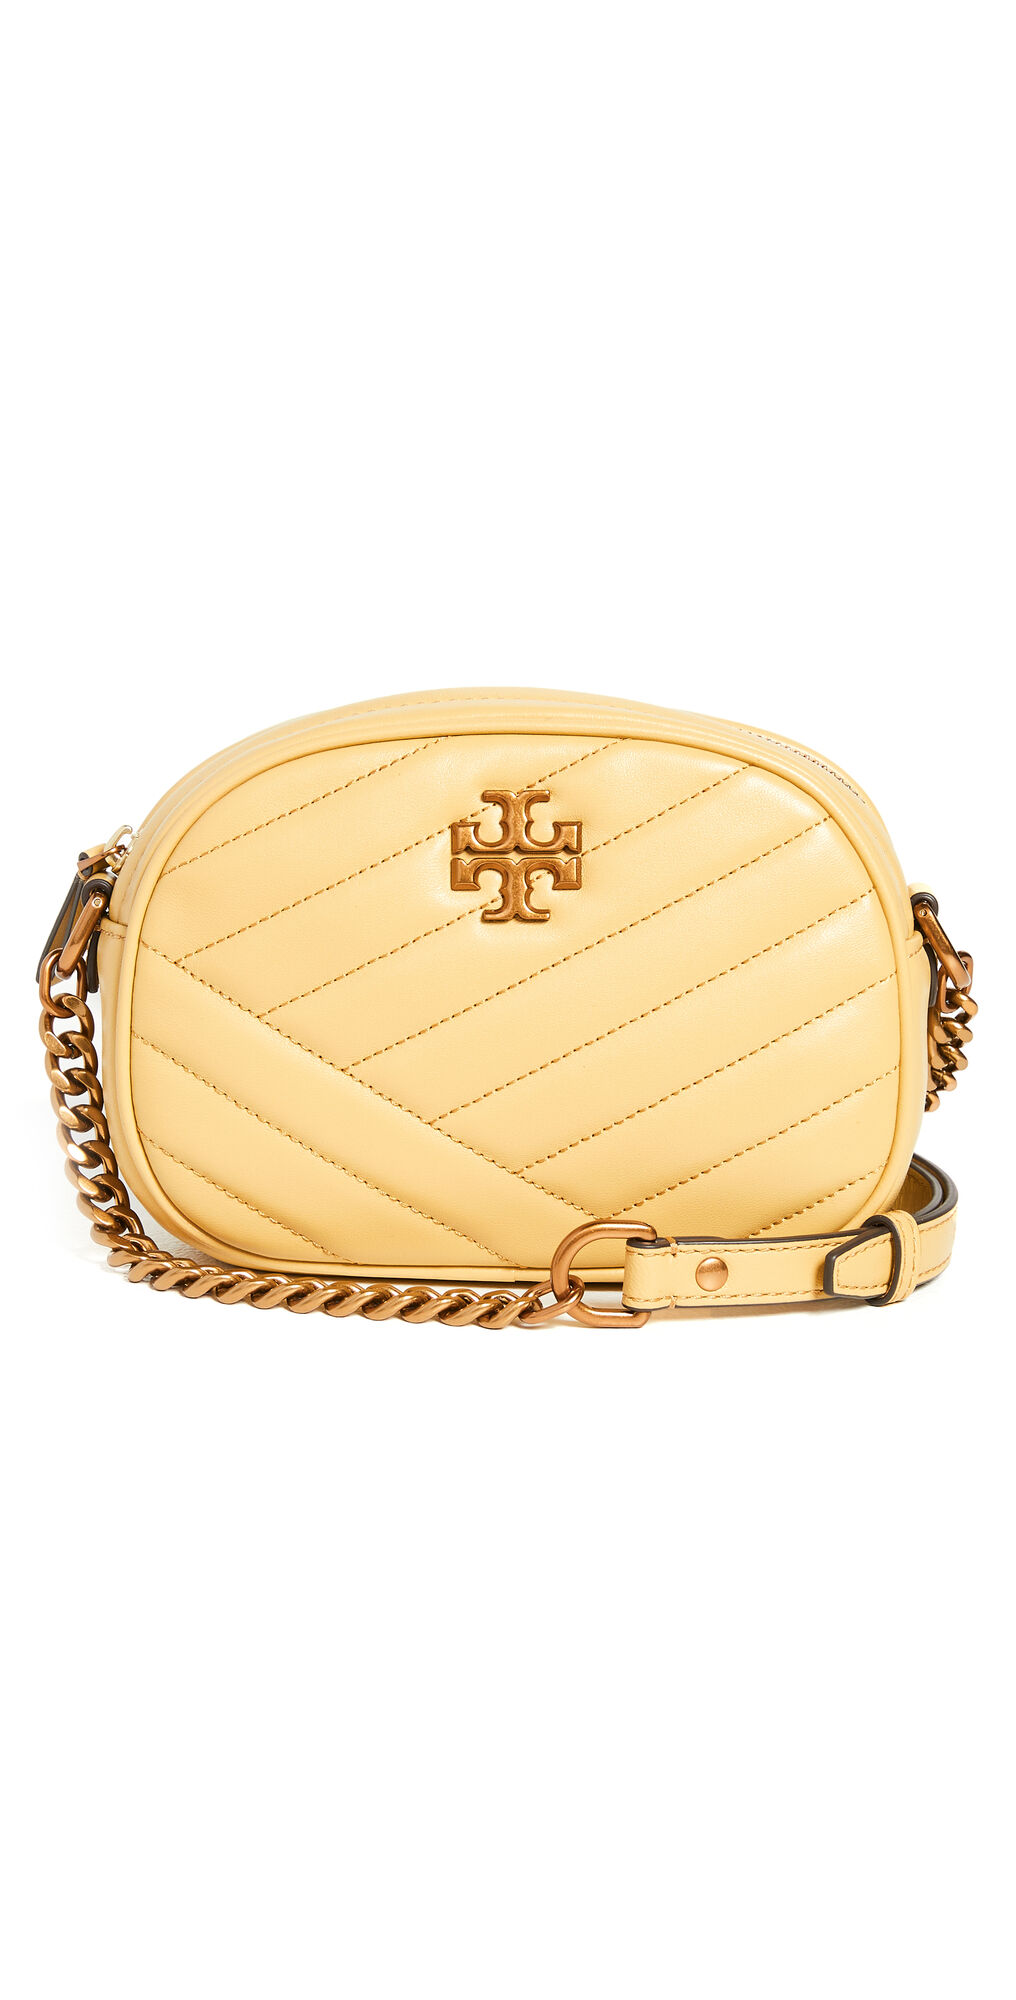 Tory Burch Kira Chevron Small Camera Bag Beeswax One Size  Beeswax  size:One Size